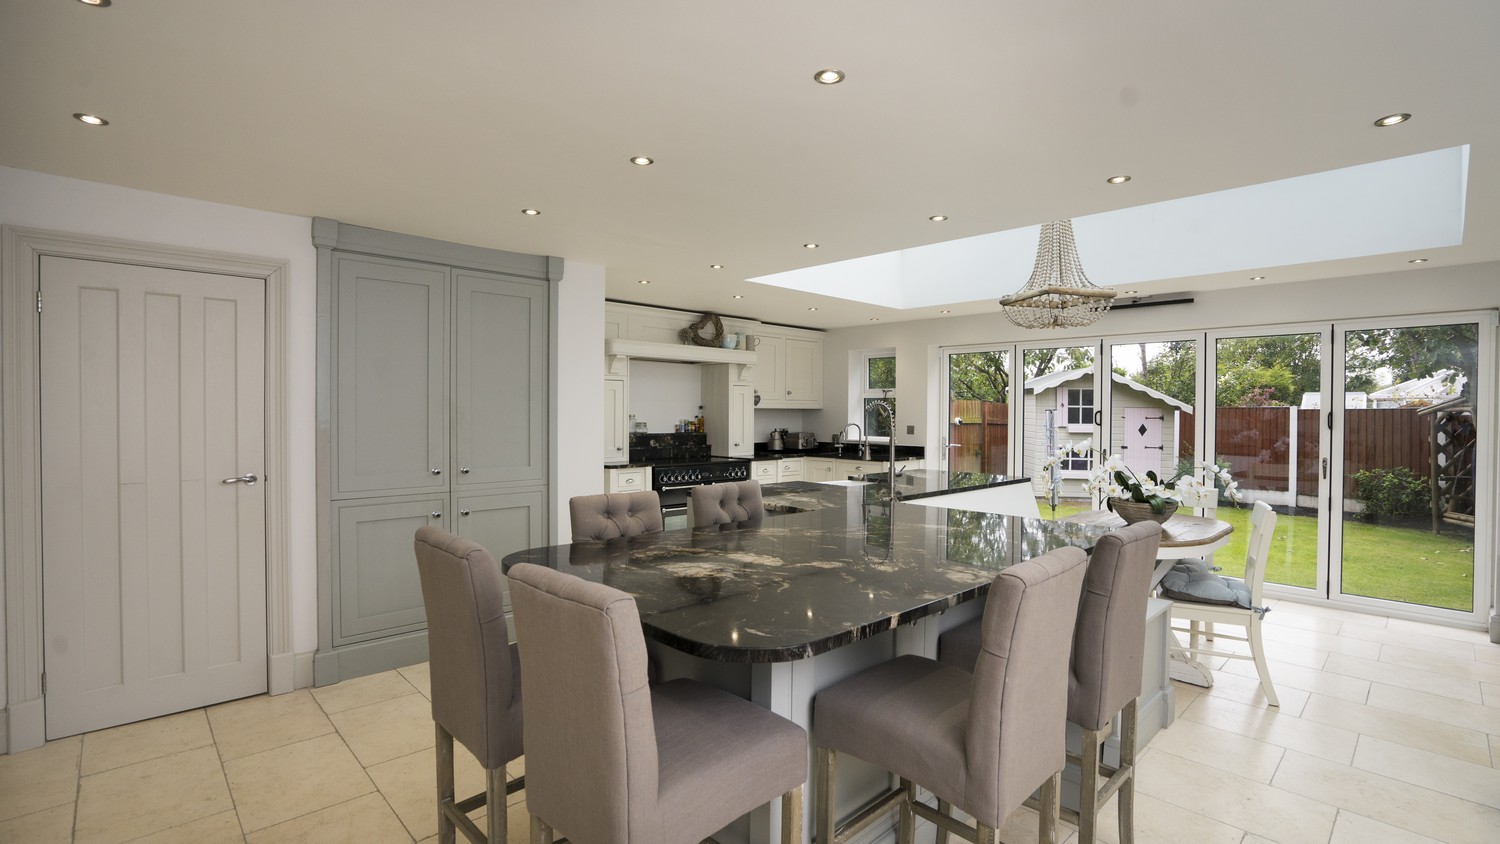 Full overview of this stunning open plan kitchen with roof lantern and bi-folding doors. This kitchen maximises on light, seating, space and all the modern appliance.